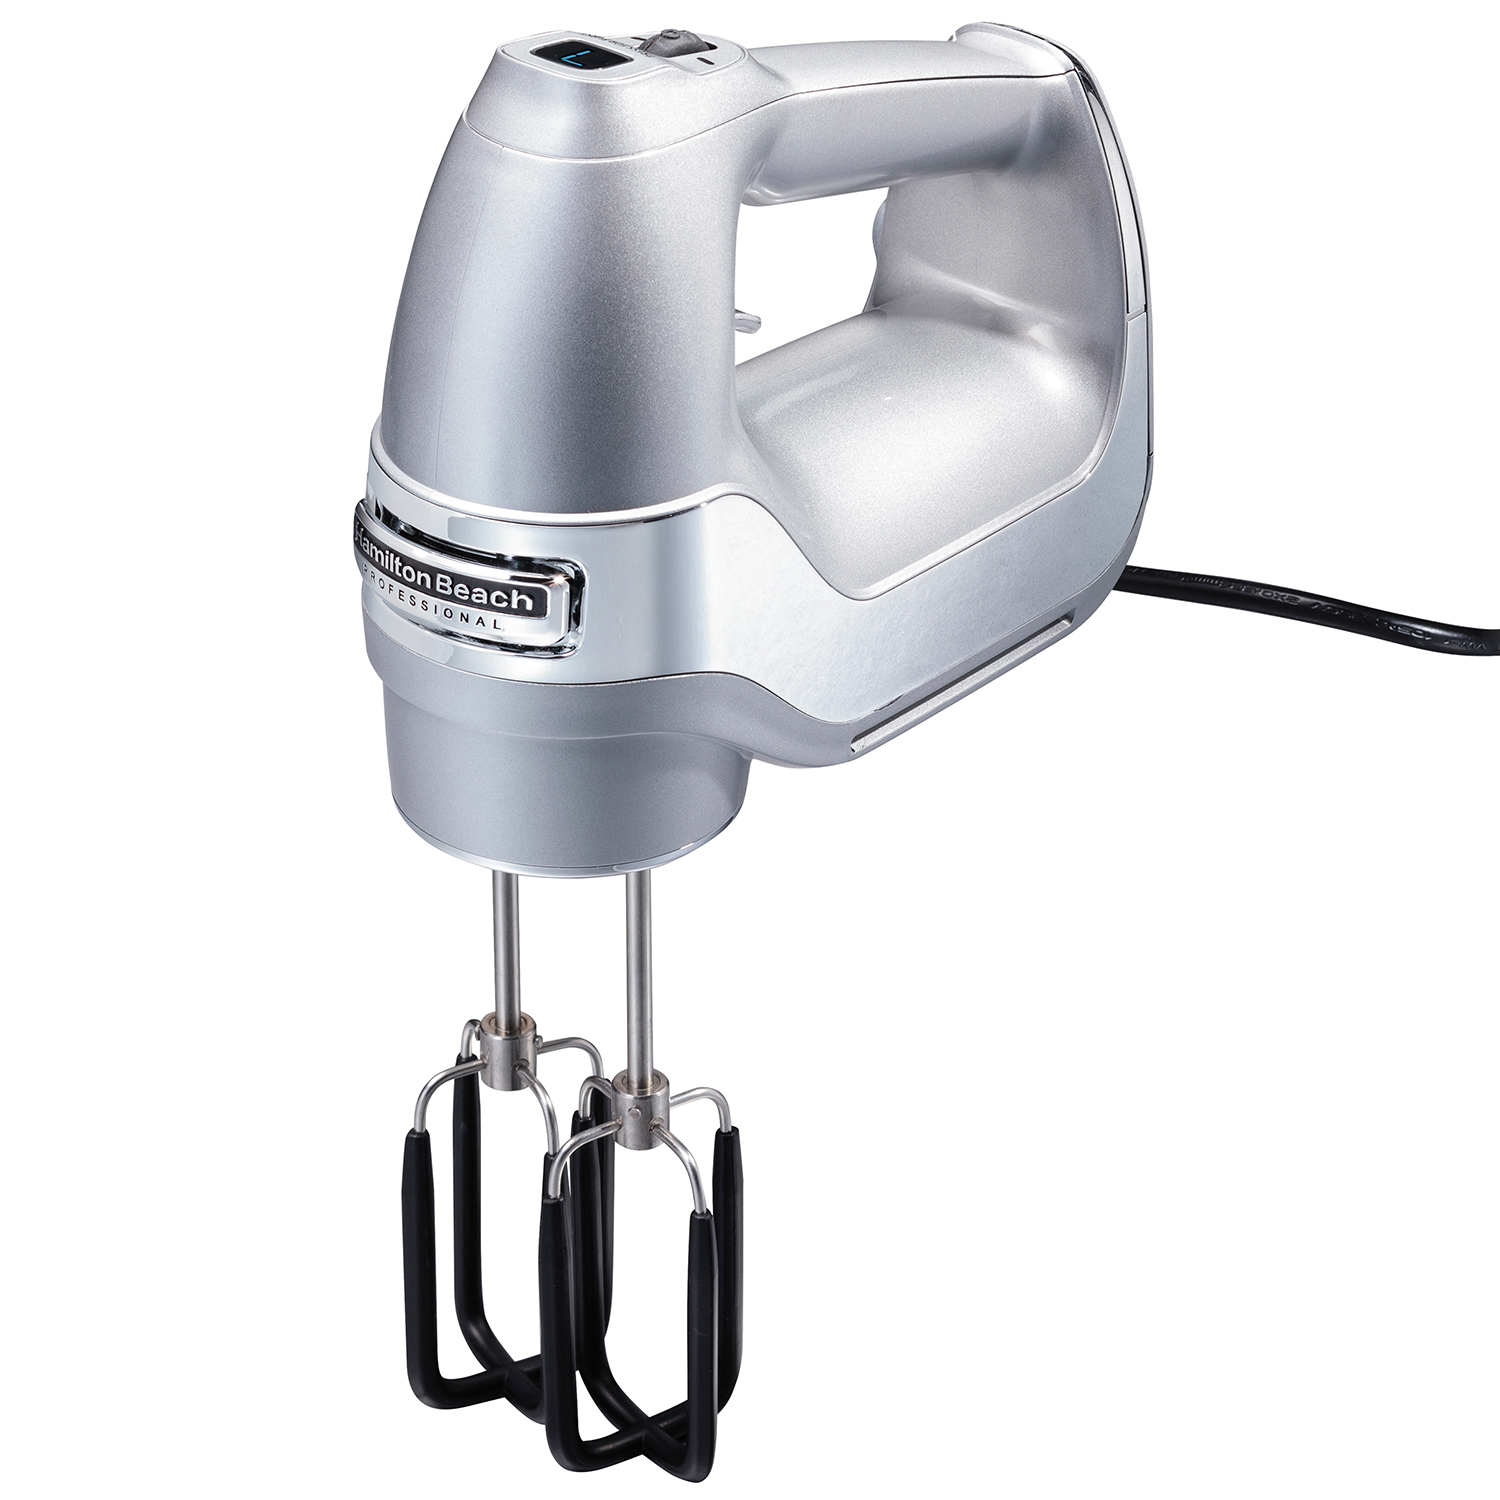 Professional 7 Speed Hand Mixer with Snap-On Case Chrome and Silver (62657)